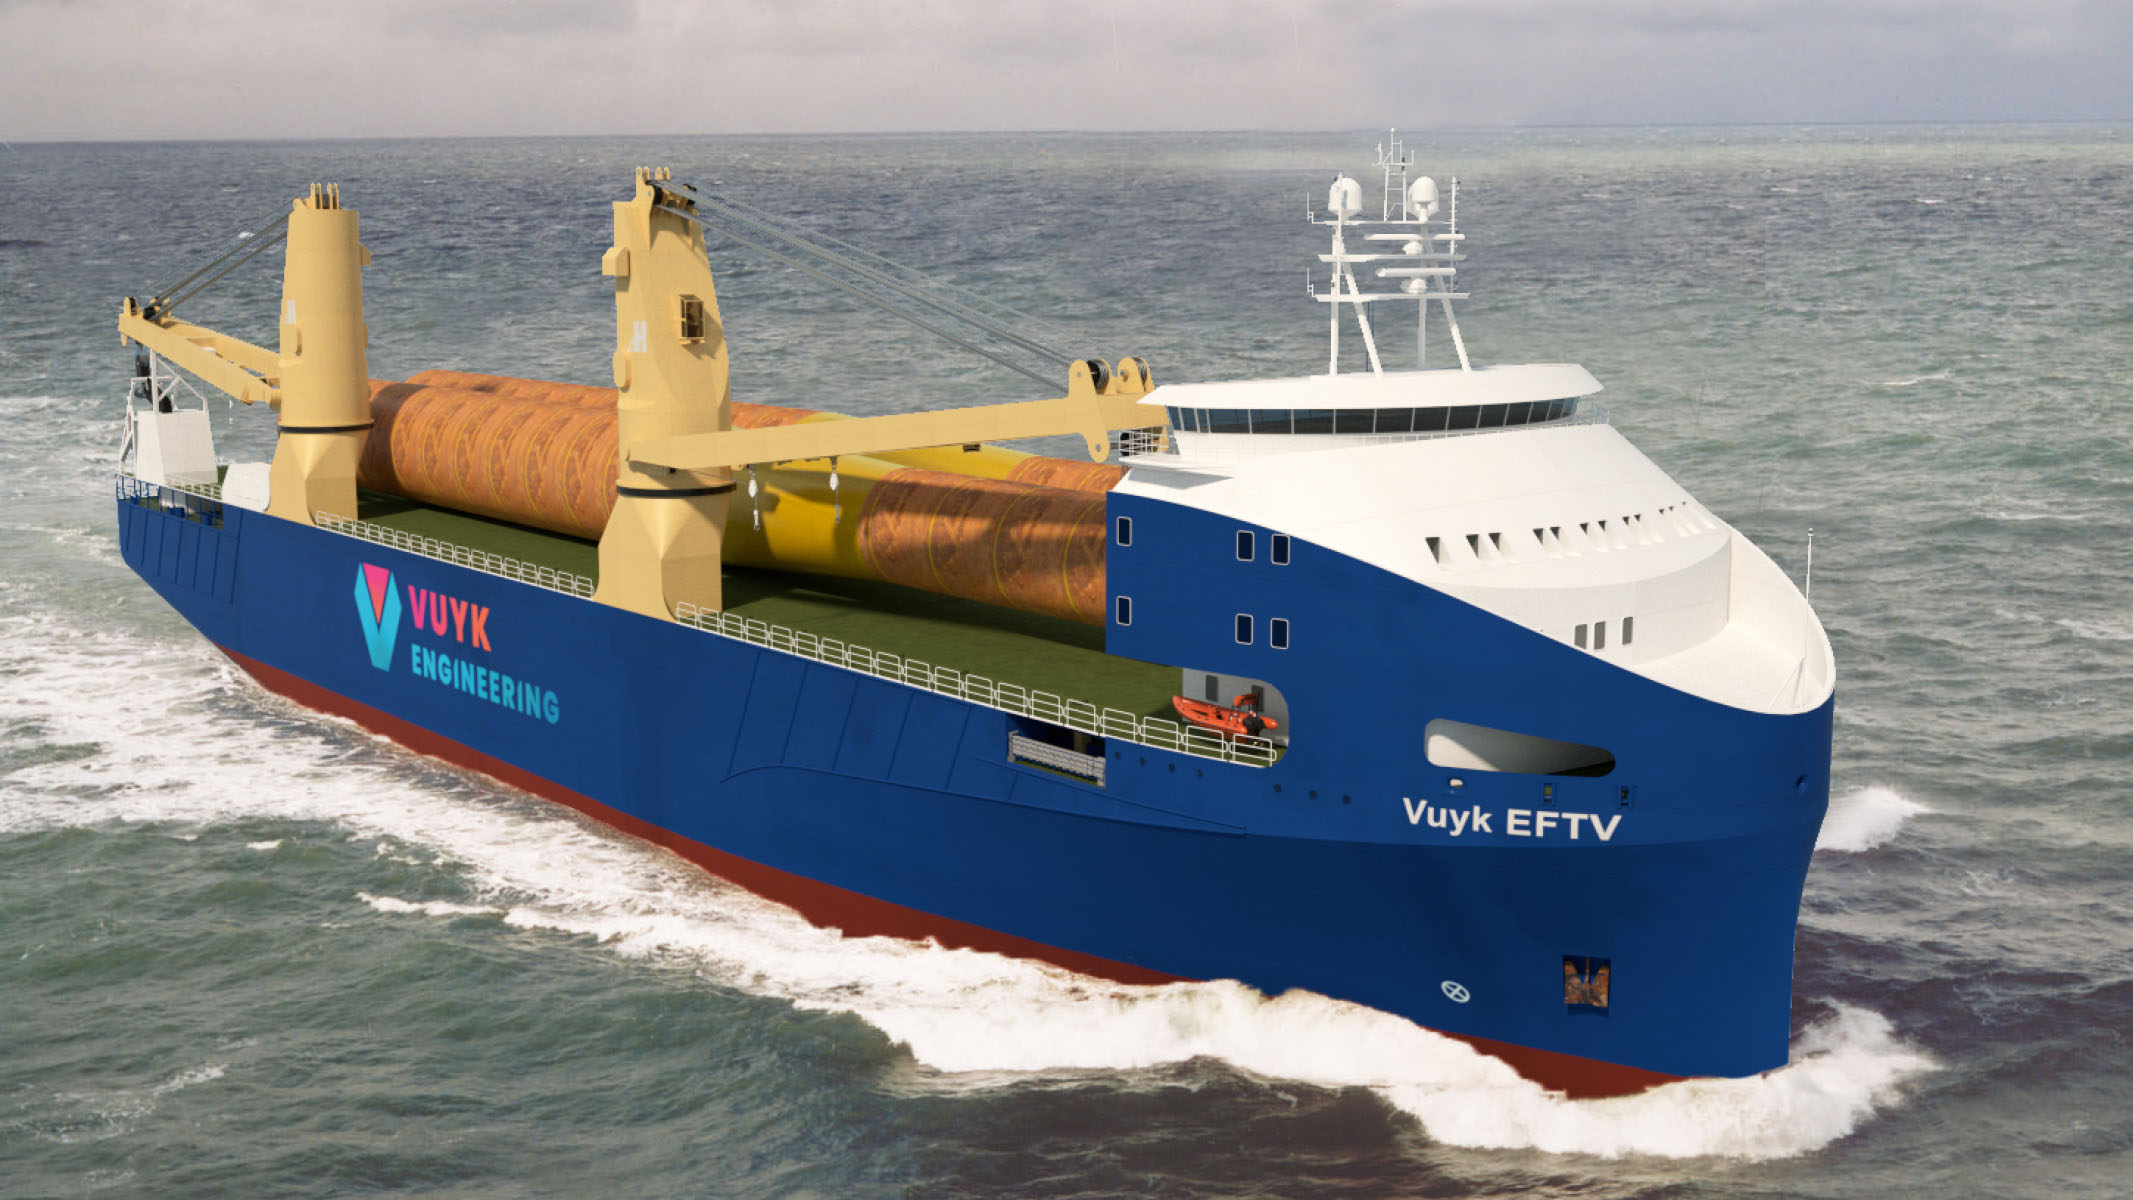 New transport vessel concept unveiled by Vuyk Engineering